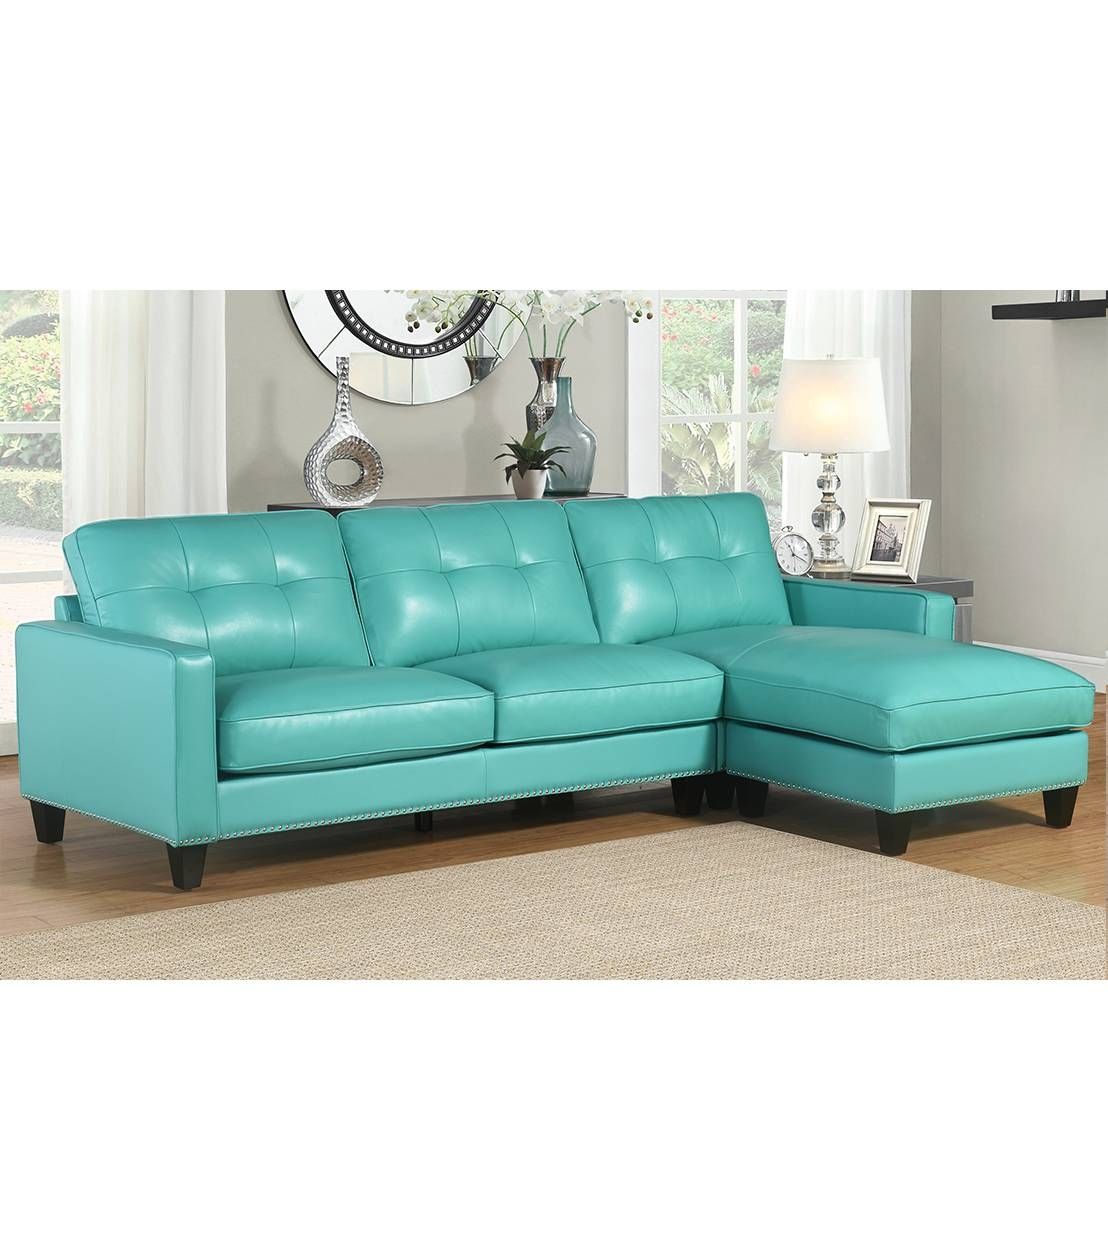 Sectionals : Leyla Sectional, Taupe Regarding Abbyson Sectional Sofa (View 16 of 30)